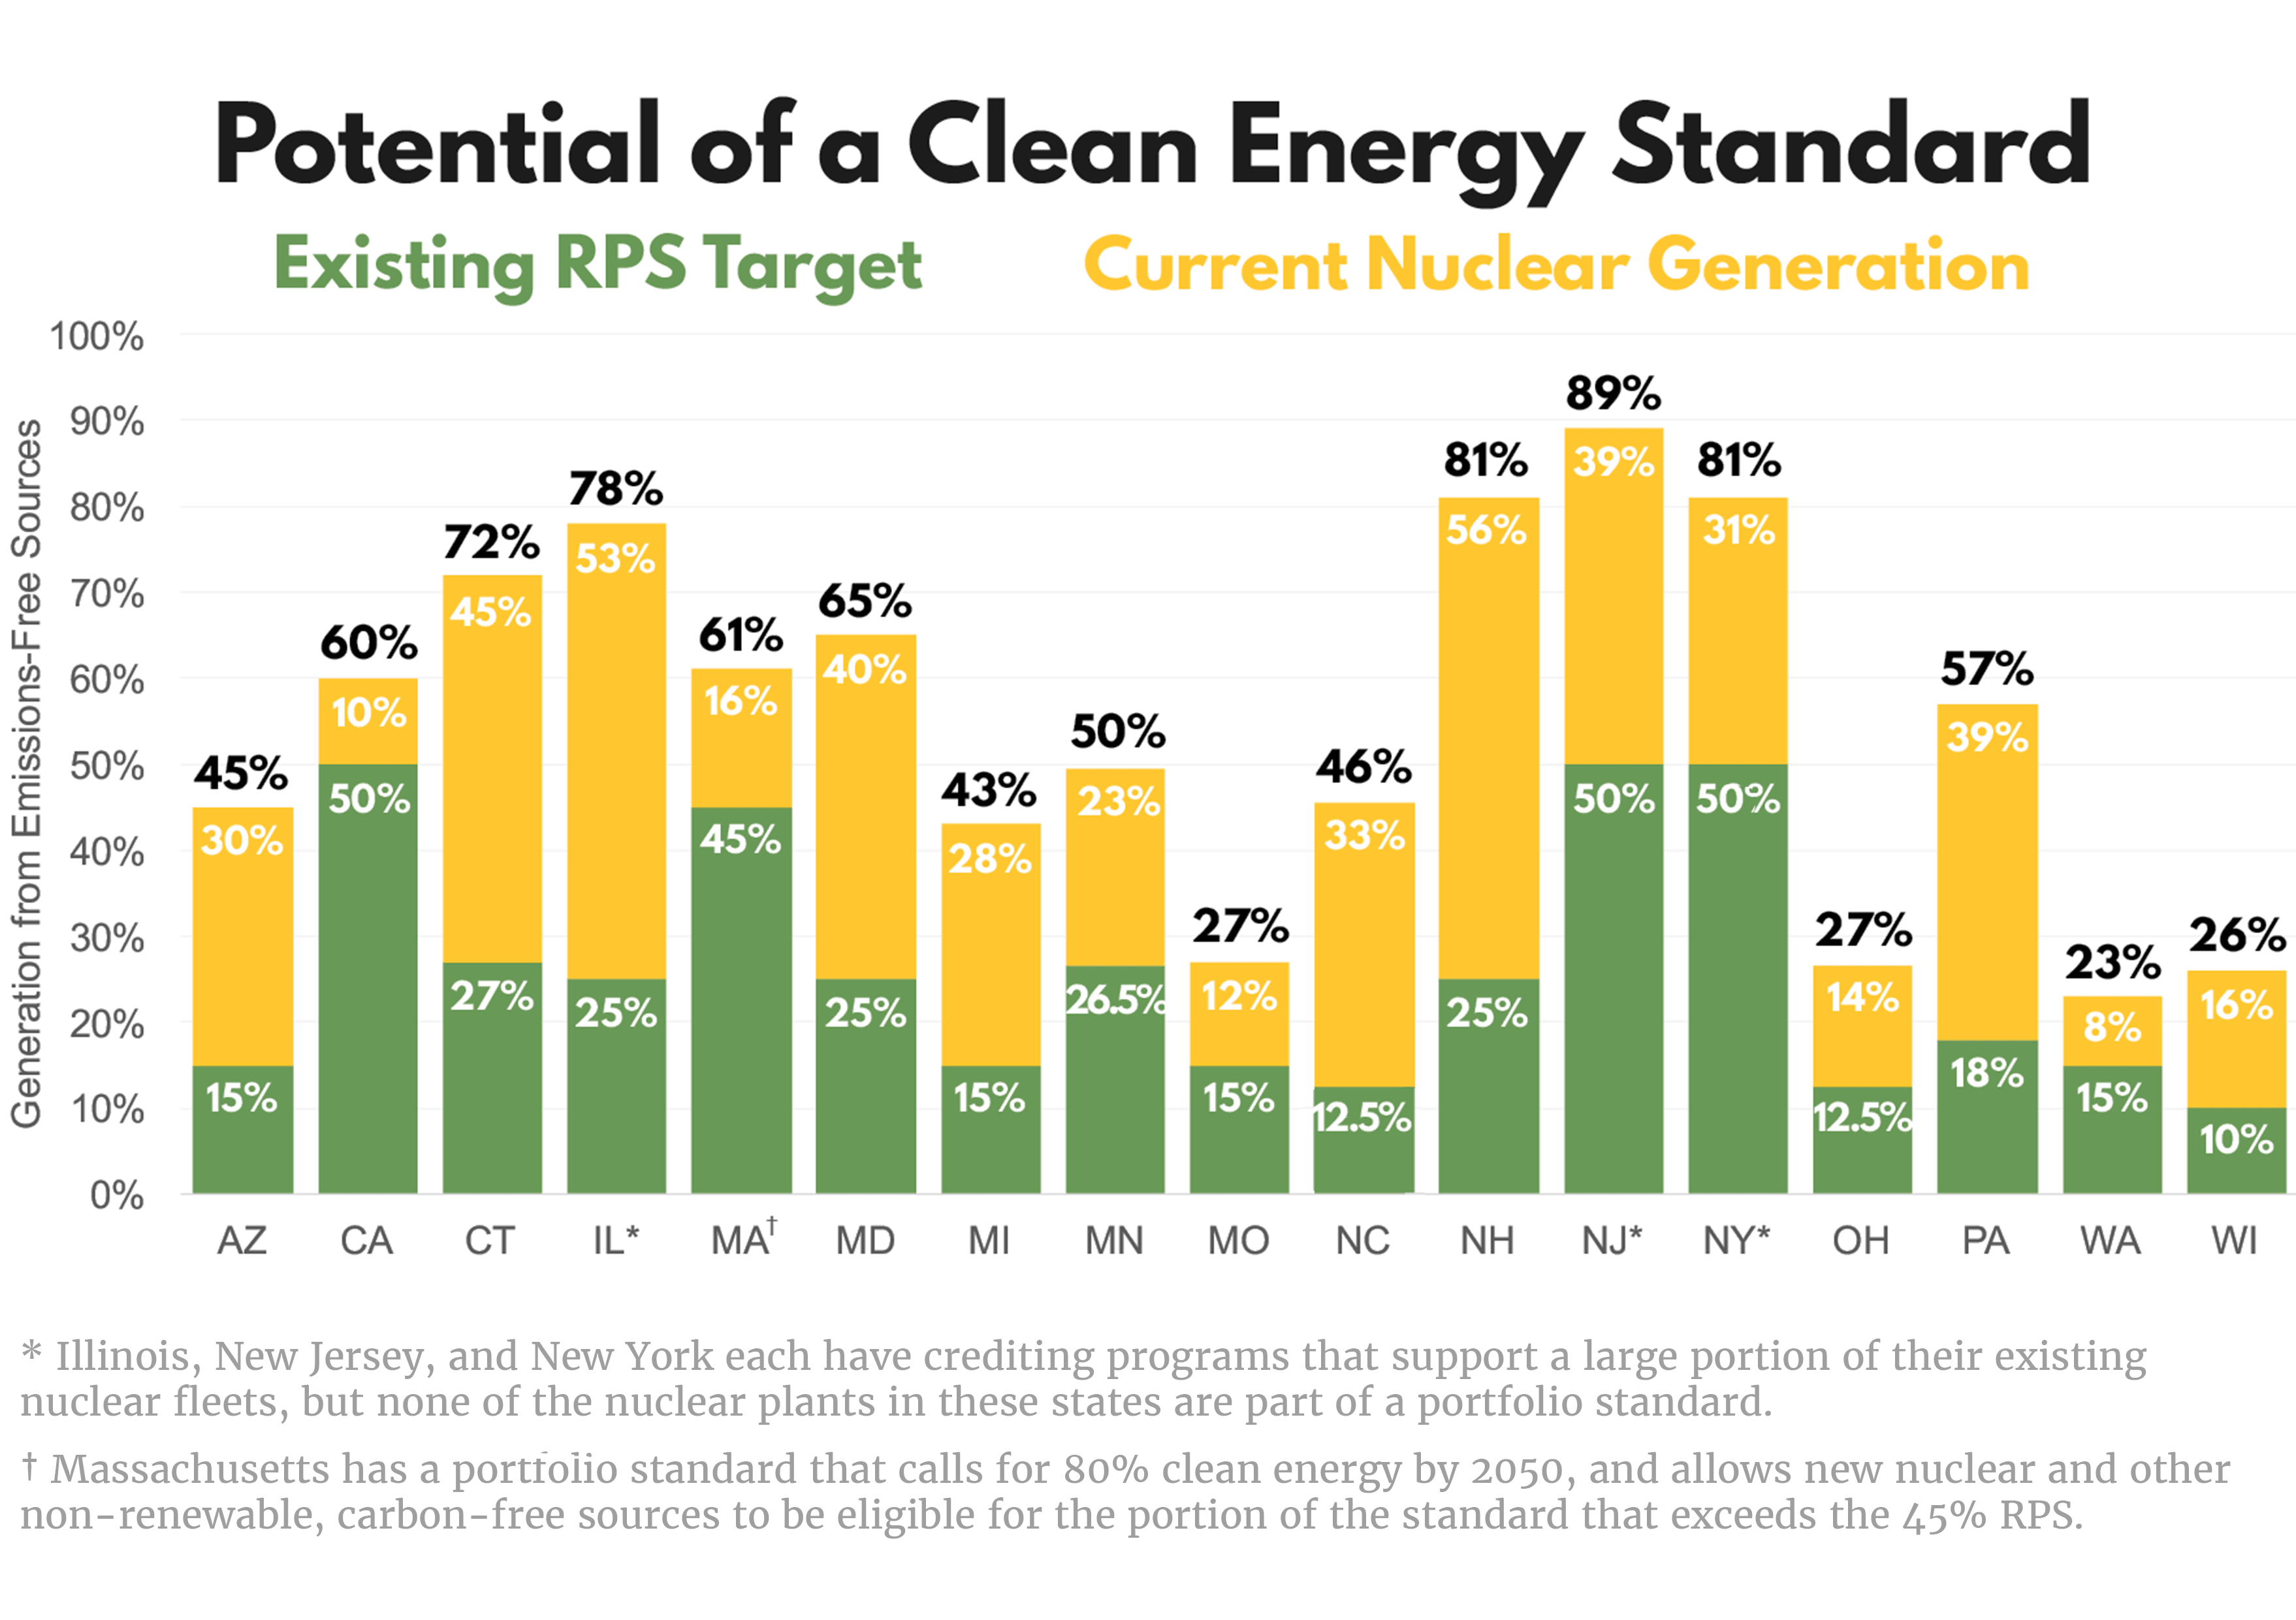 GIF showing effect of adding nuclear to state renewables standards to create broader "clean" standard